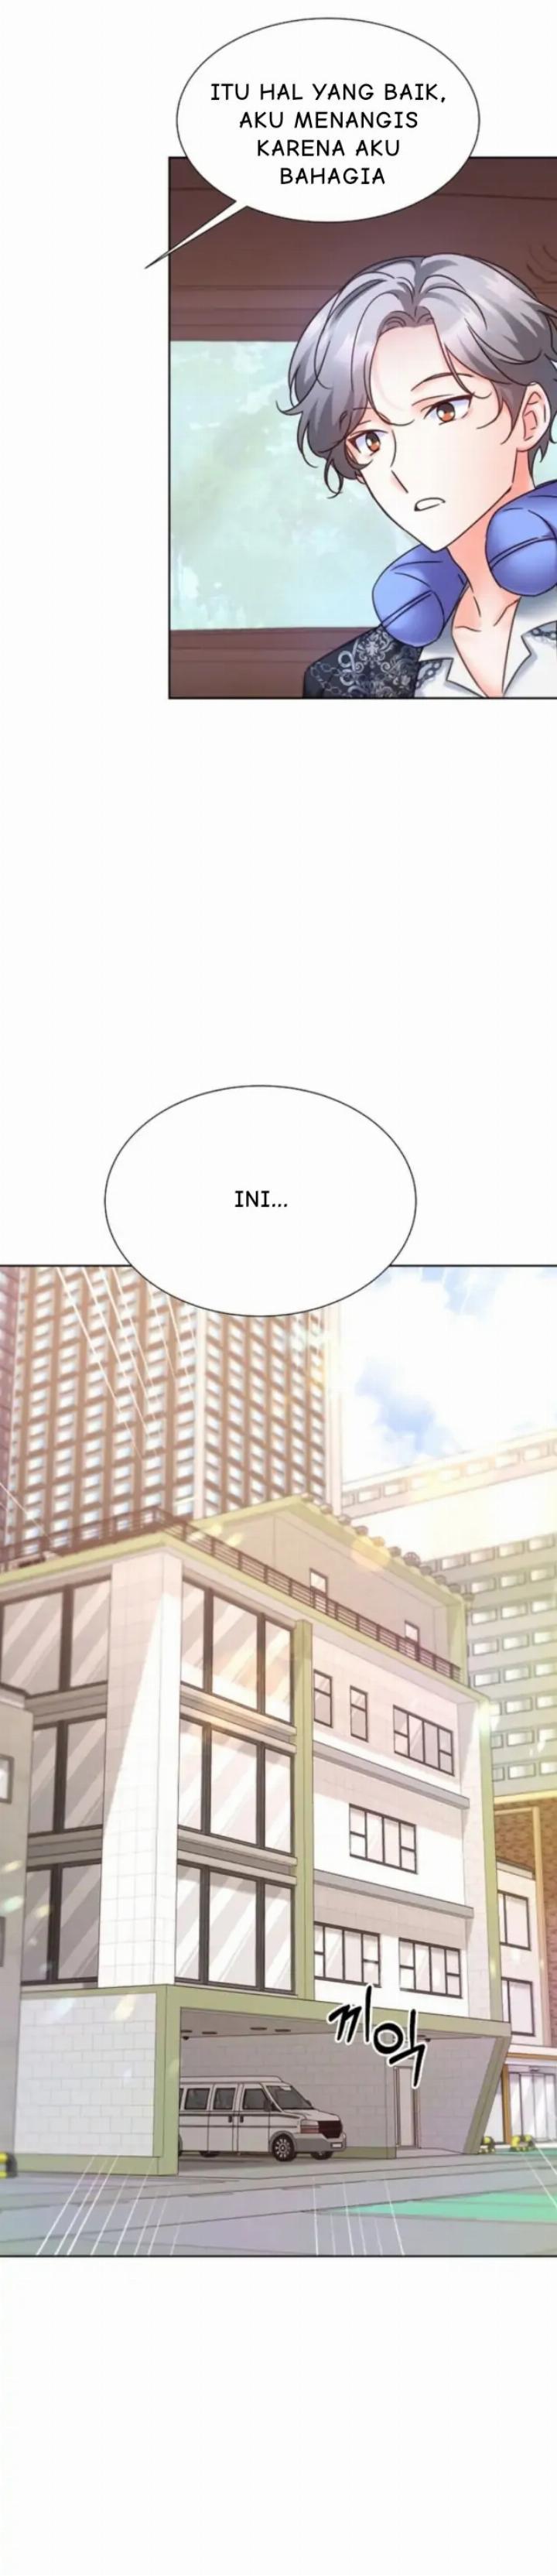 Once Again Idol Chapter 69